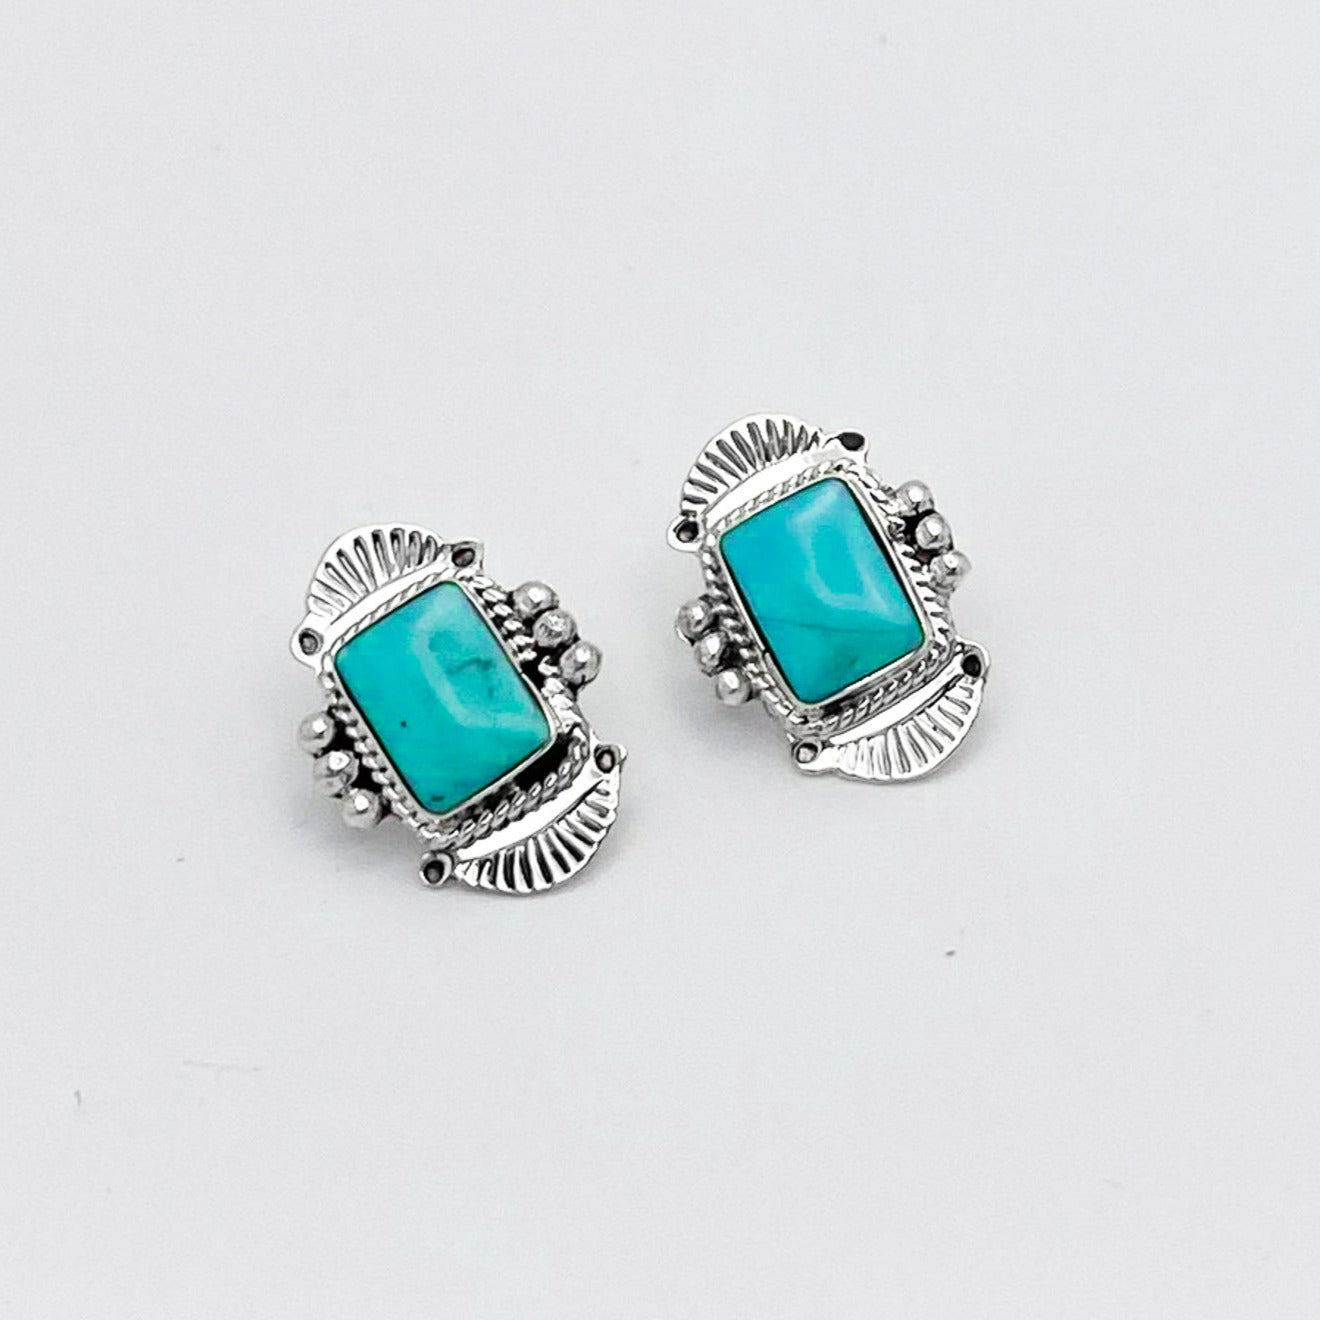 Small square Navajo Turquoise in southwestern fan themed stamped 925 Sterling Silver setting with three silver spheres on either side of the stone - 925 Sterling Silver post studs - Artist: Hallmarked - Arlene Lewis from Gallup, New Mexico 